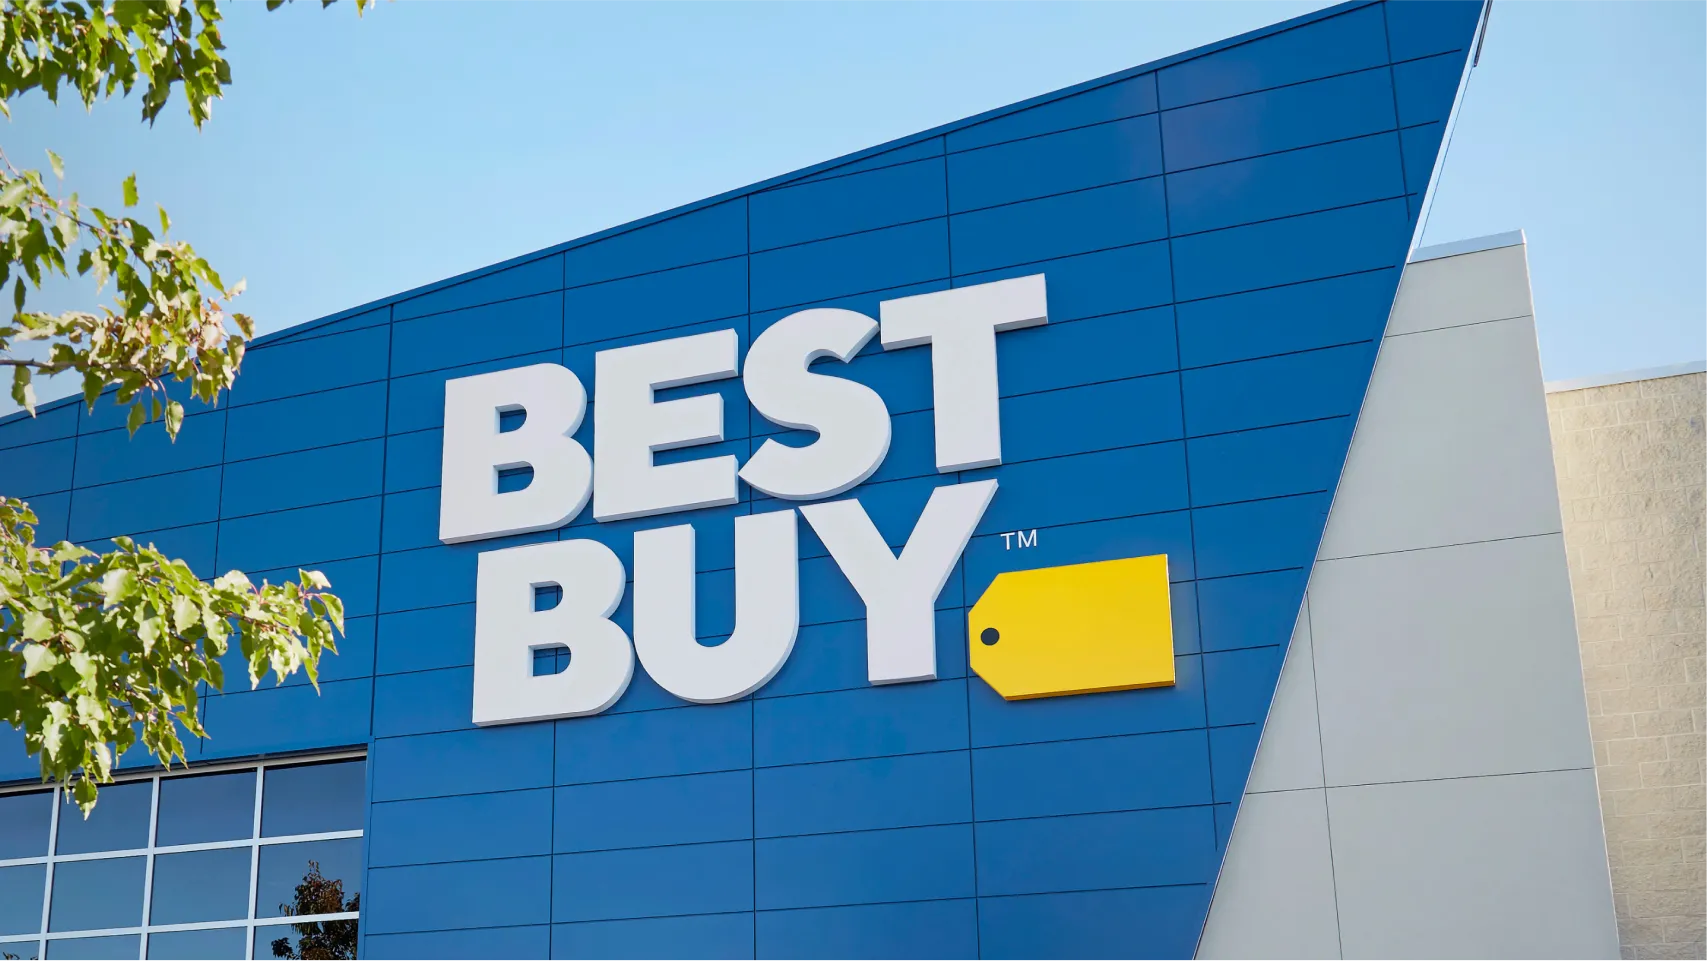 The Best Buy logo on the front of a Best Buy store.  “Best Buy” is in large white text with a yellow tag next to it.